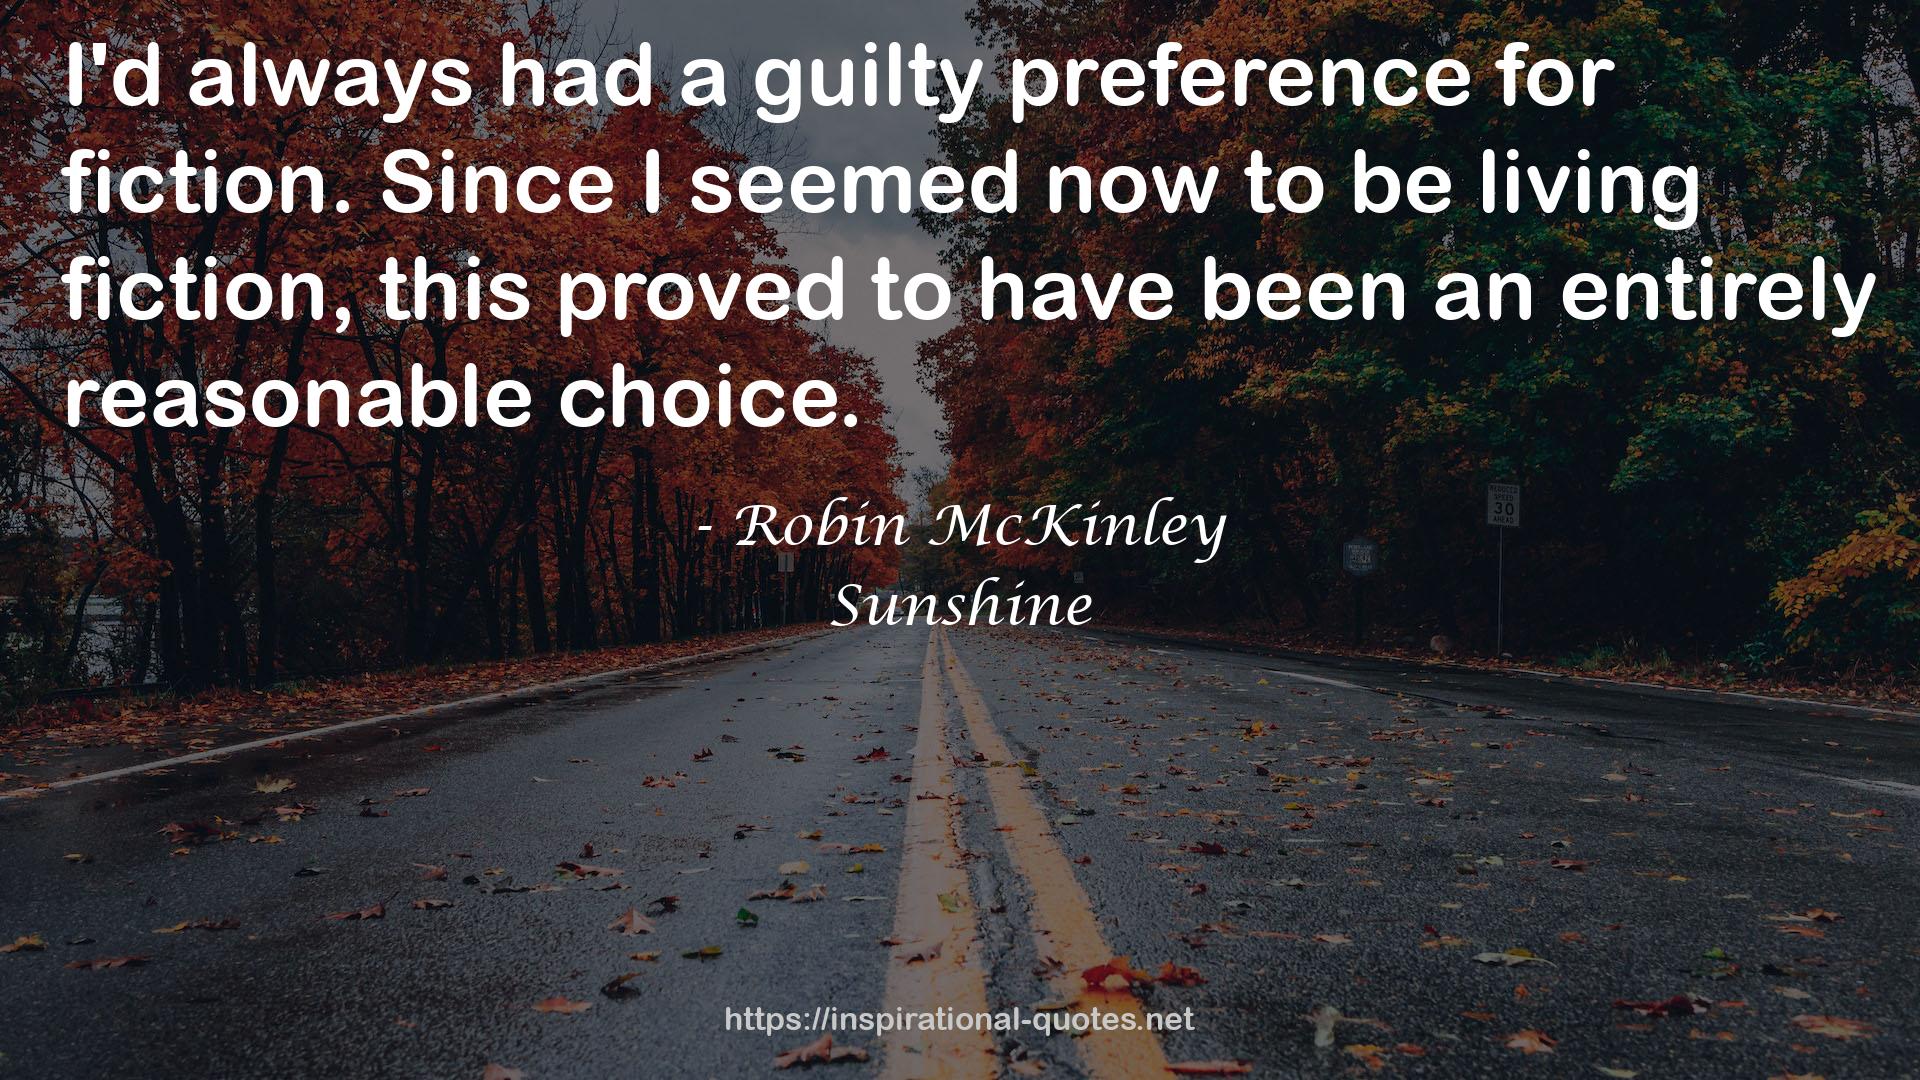 a guilty preference  QUOTES